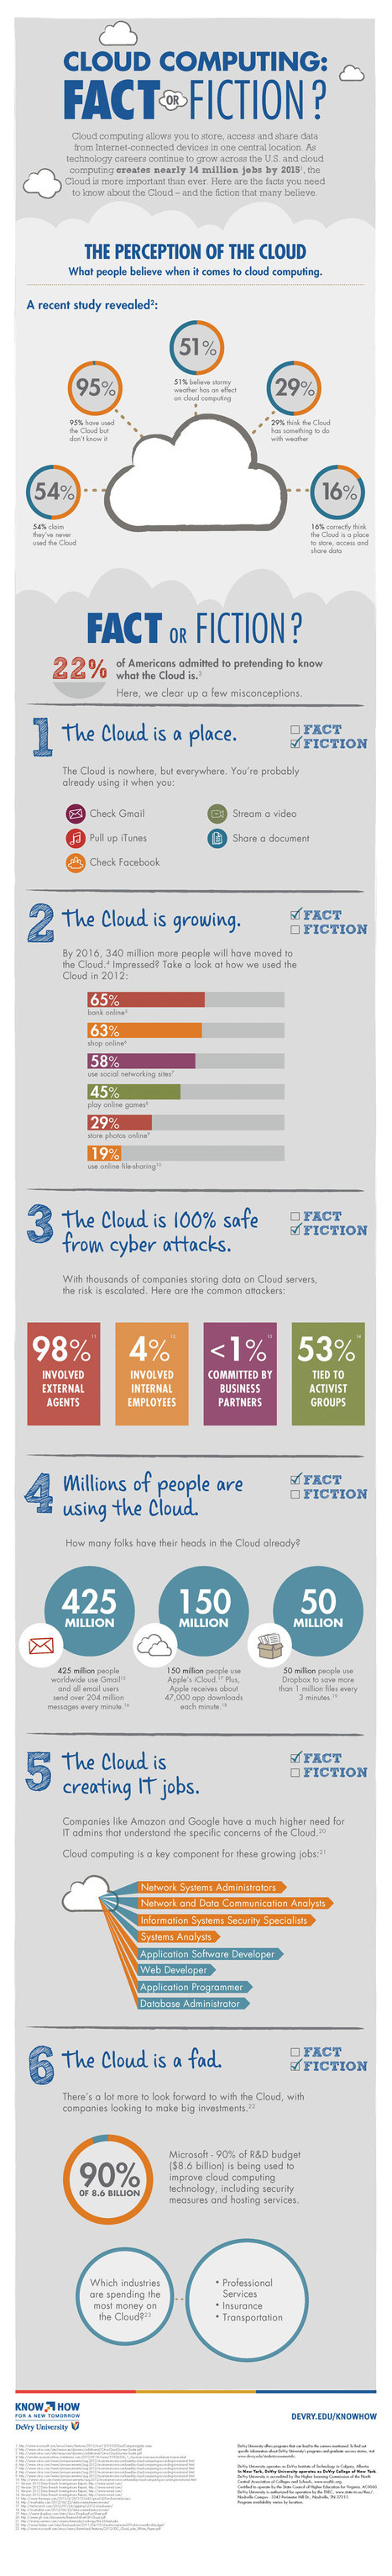 Is Cloud Computing a Fact or Fiction? – infographic | Didactics and Technology in Education | Scoop.it